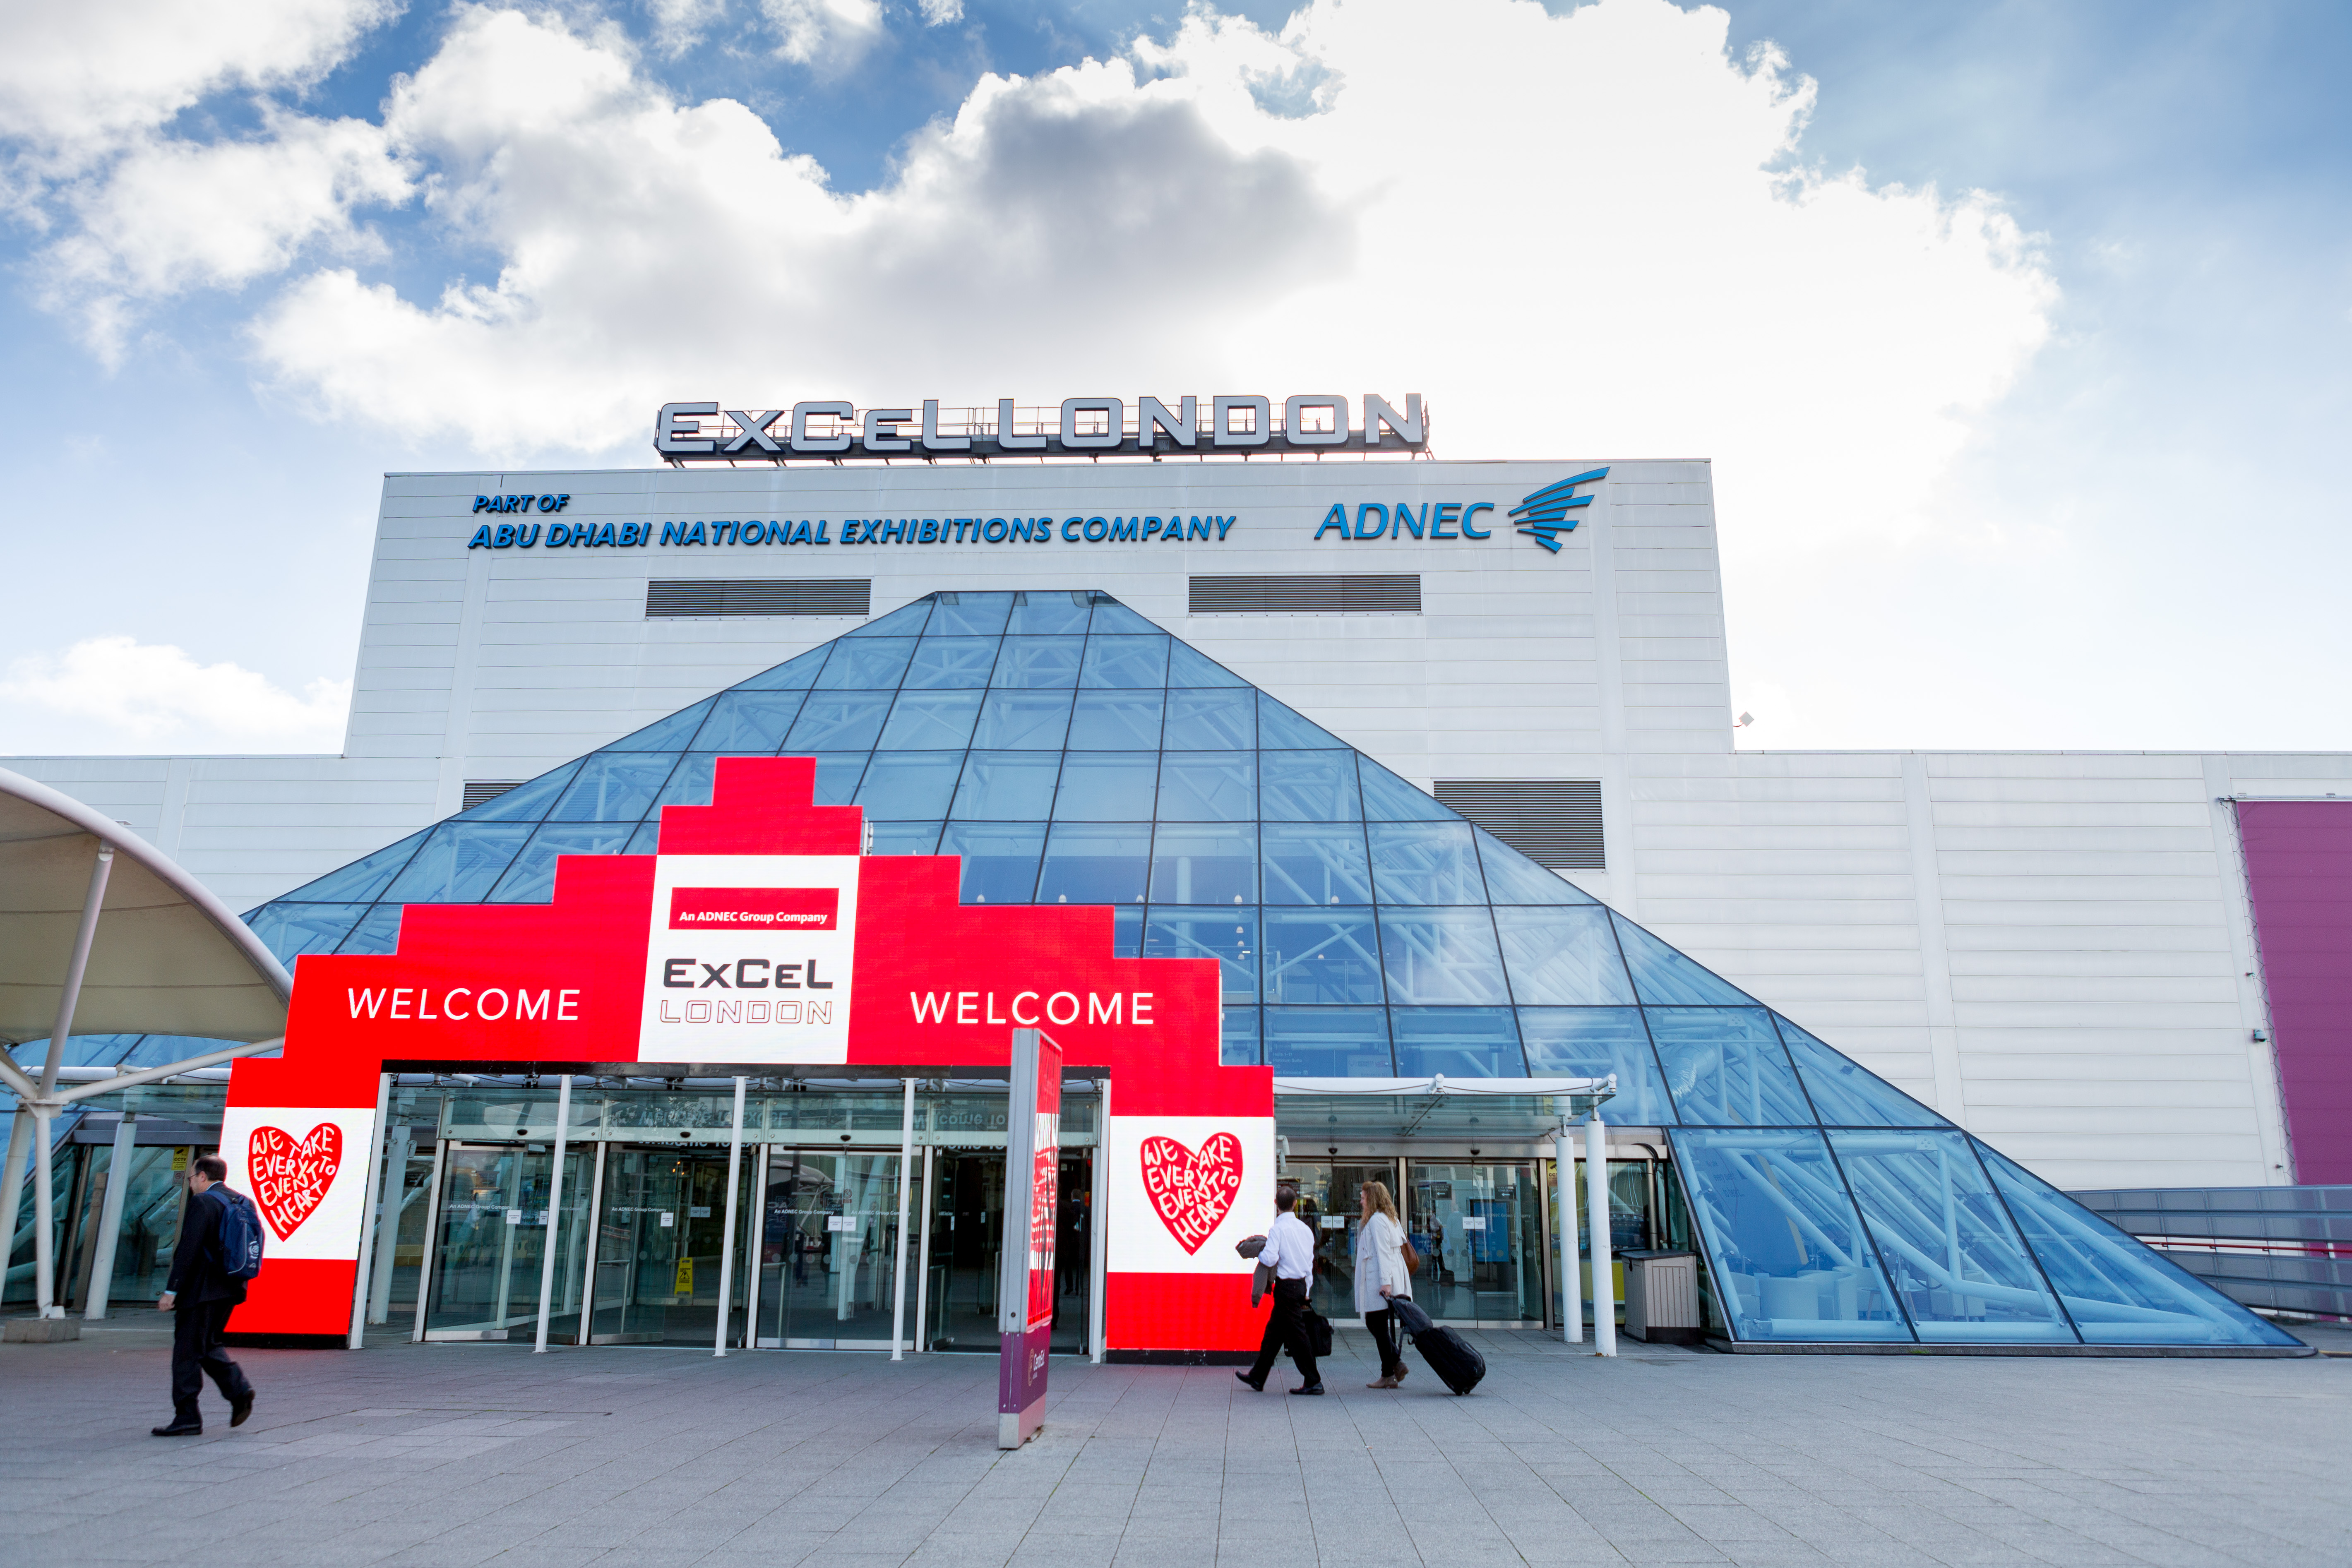 2017 – The Business Show – Excel London